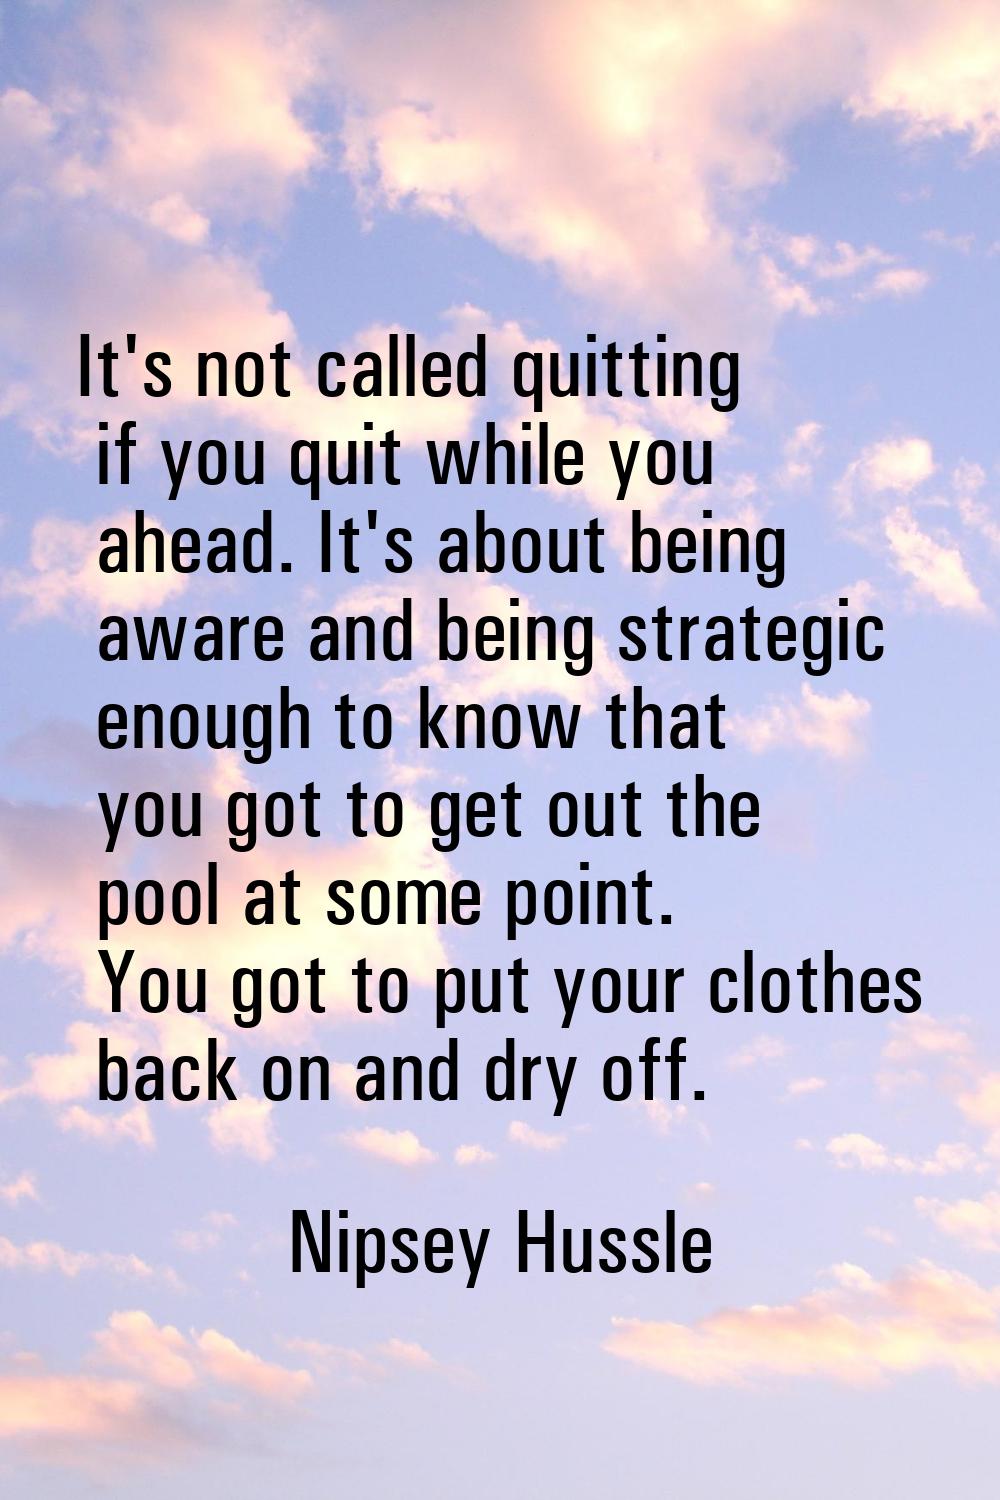 It's not called quitting if you quit while you ahead. It's about being aware and being strategic en